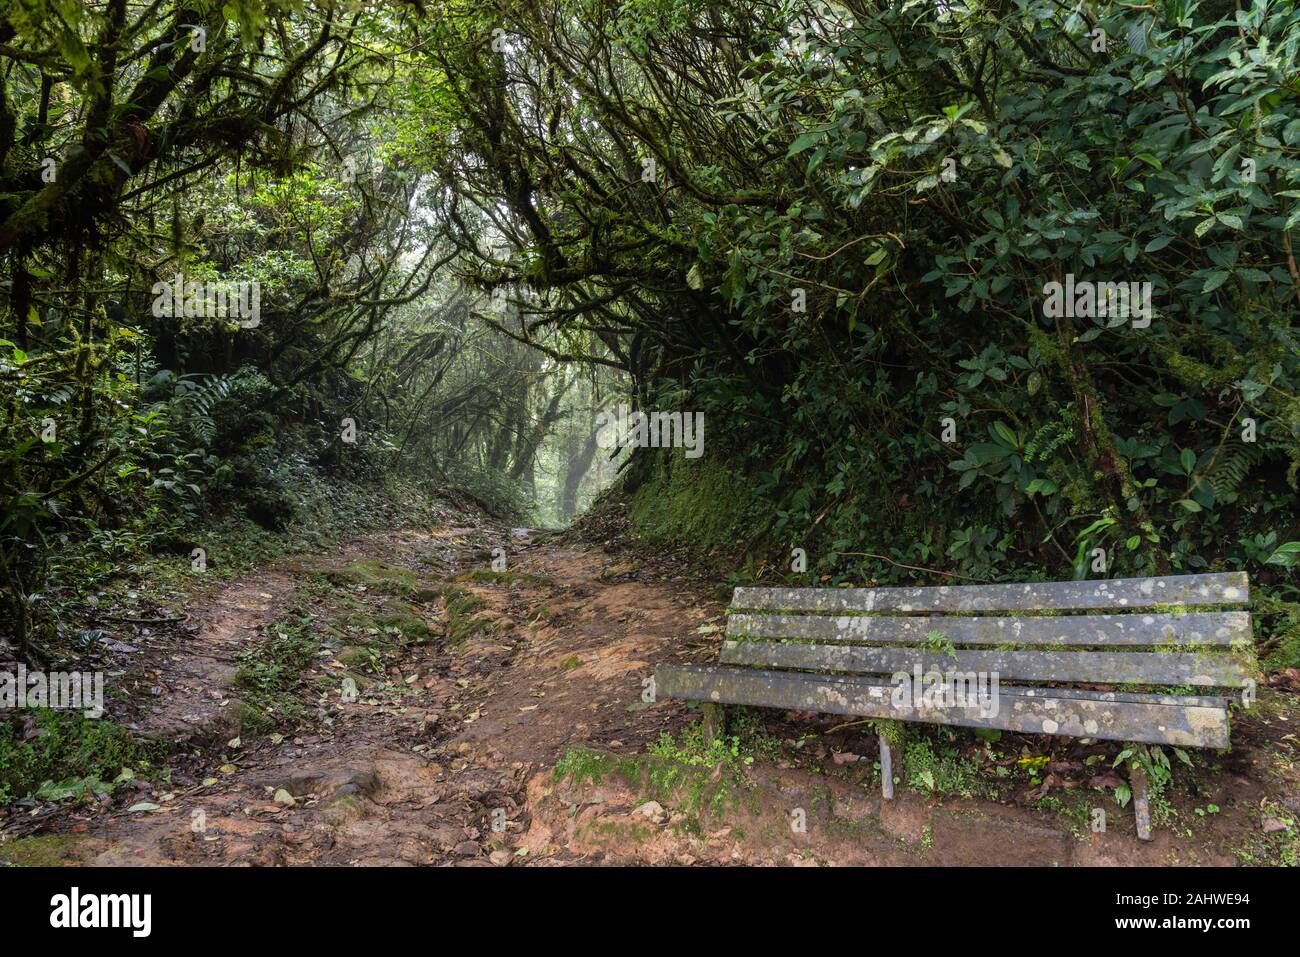 A bench in the forest, Monteverde Cloud Forest Reserve, Costa Rica Stock Photo